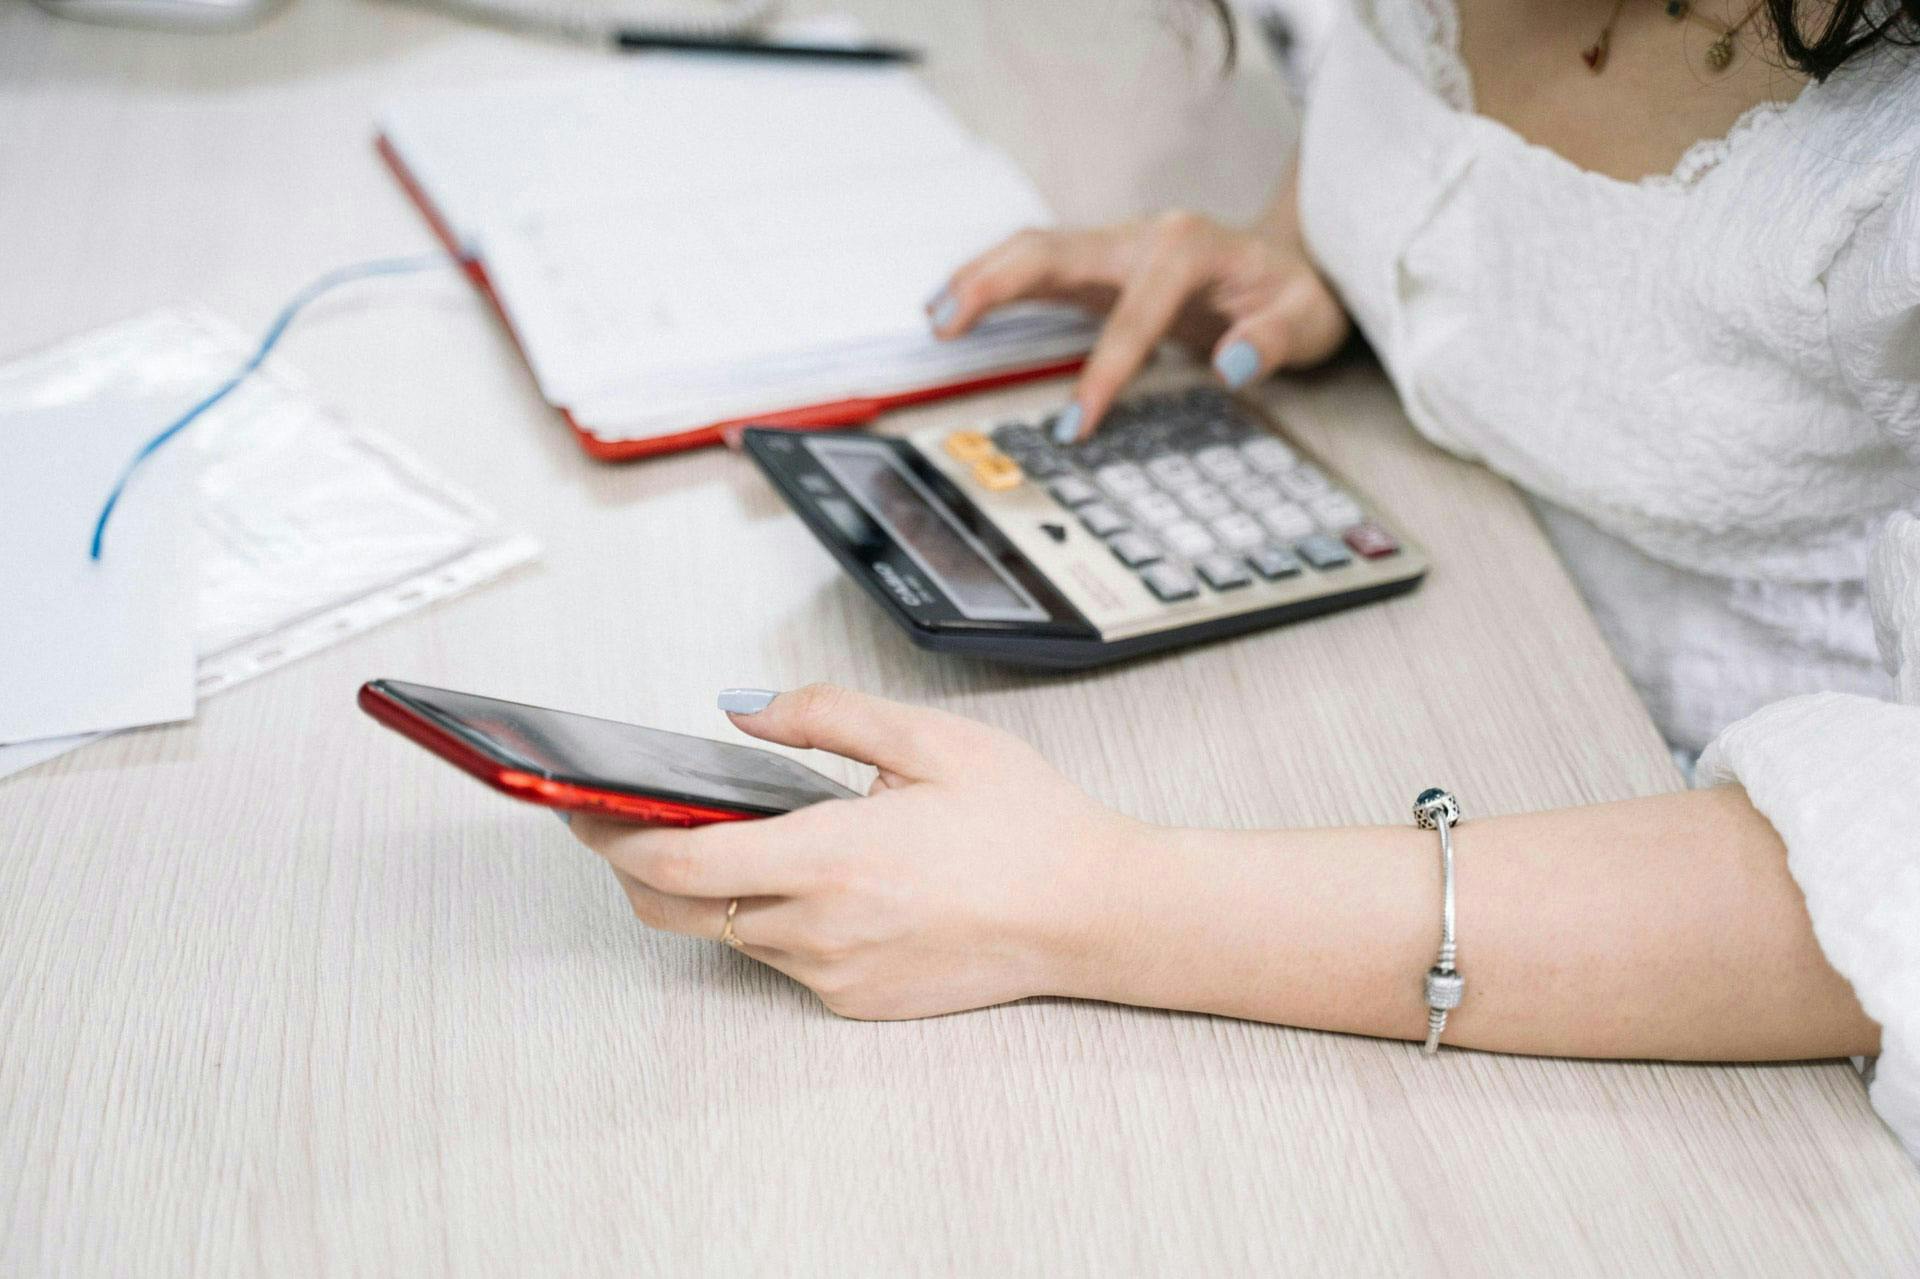 A person uses a calculator with one hand while holding a smartphone in the other, at a desk with papers and an open notebook.